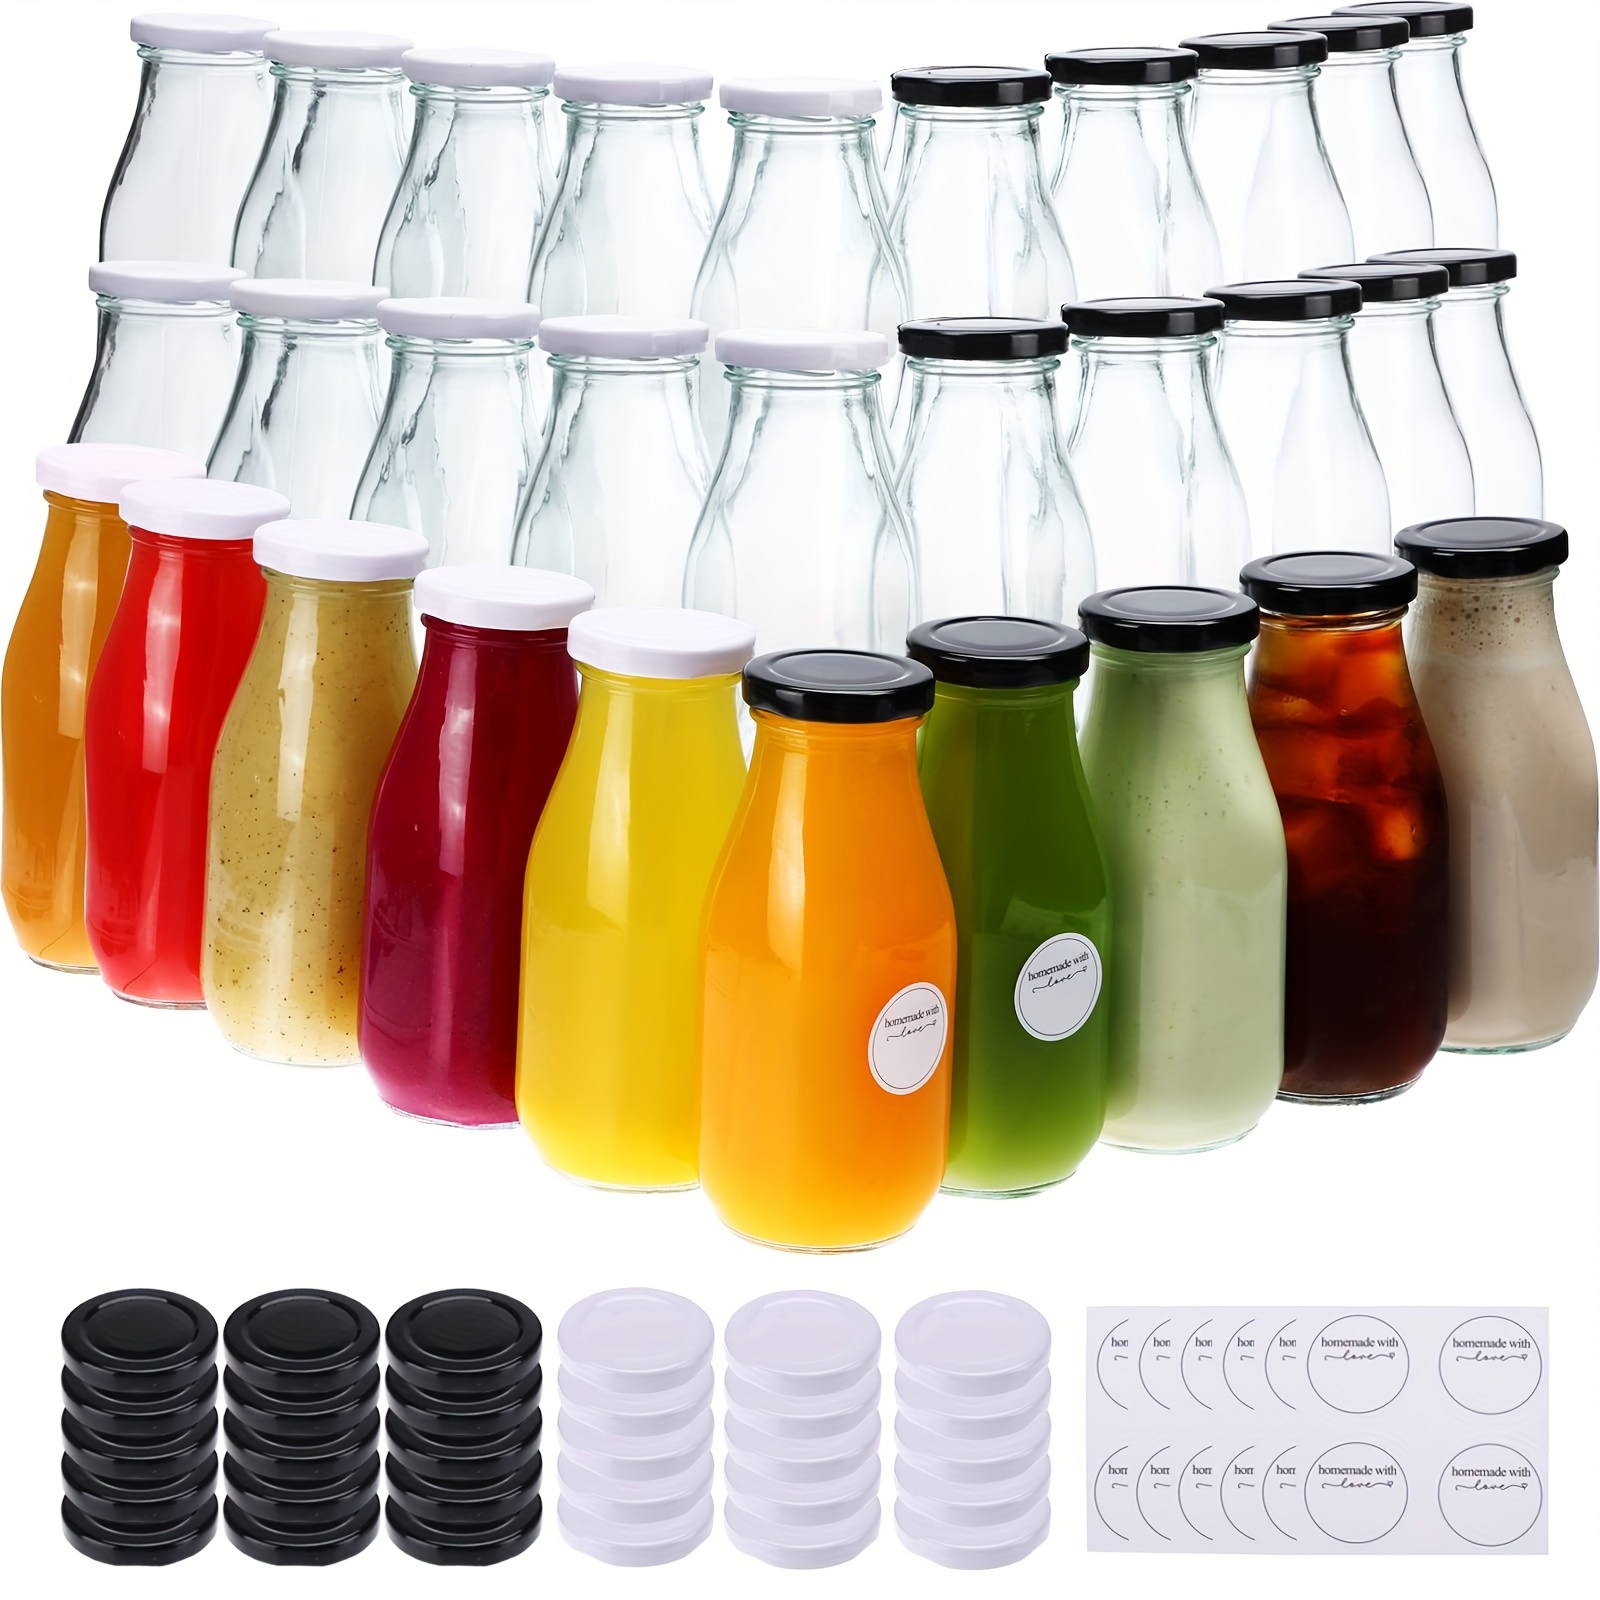 4pcs Milk Containers for Refrigerator Milk Jugs Glass Milk Bottles with Lids  250ml 